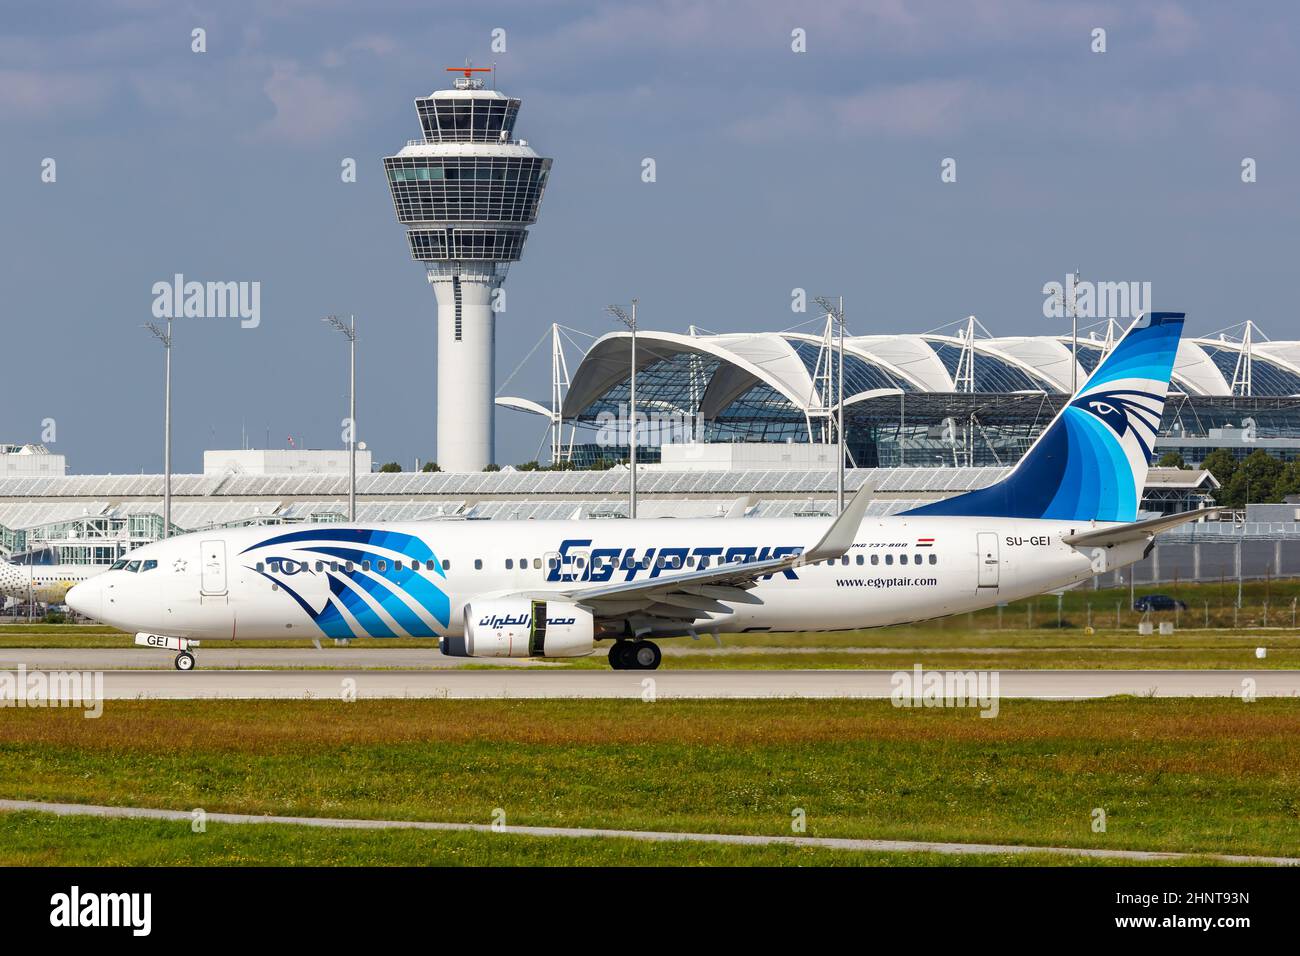 Egyptair Boeing 737-800 airplane Munich airport in Germany Stock Photo